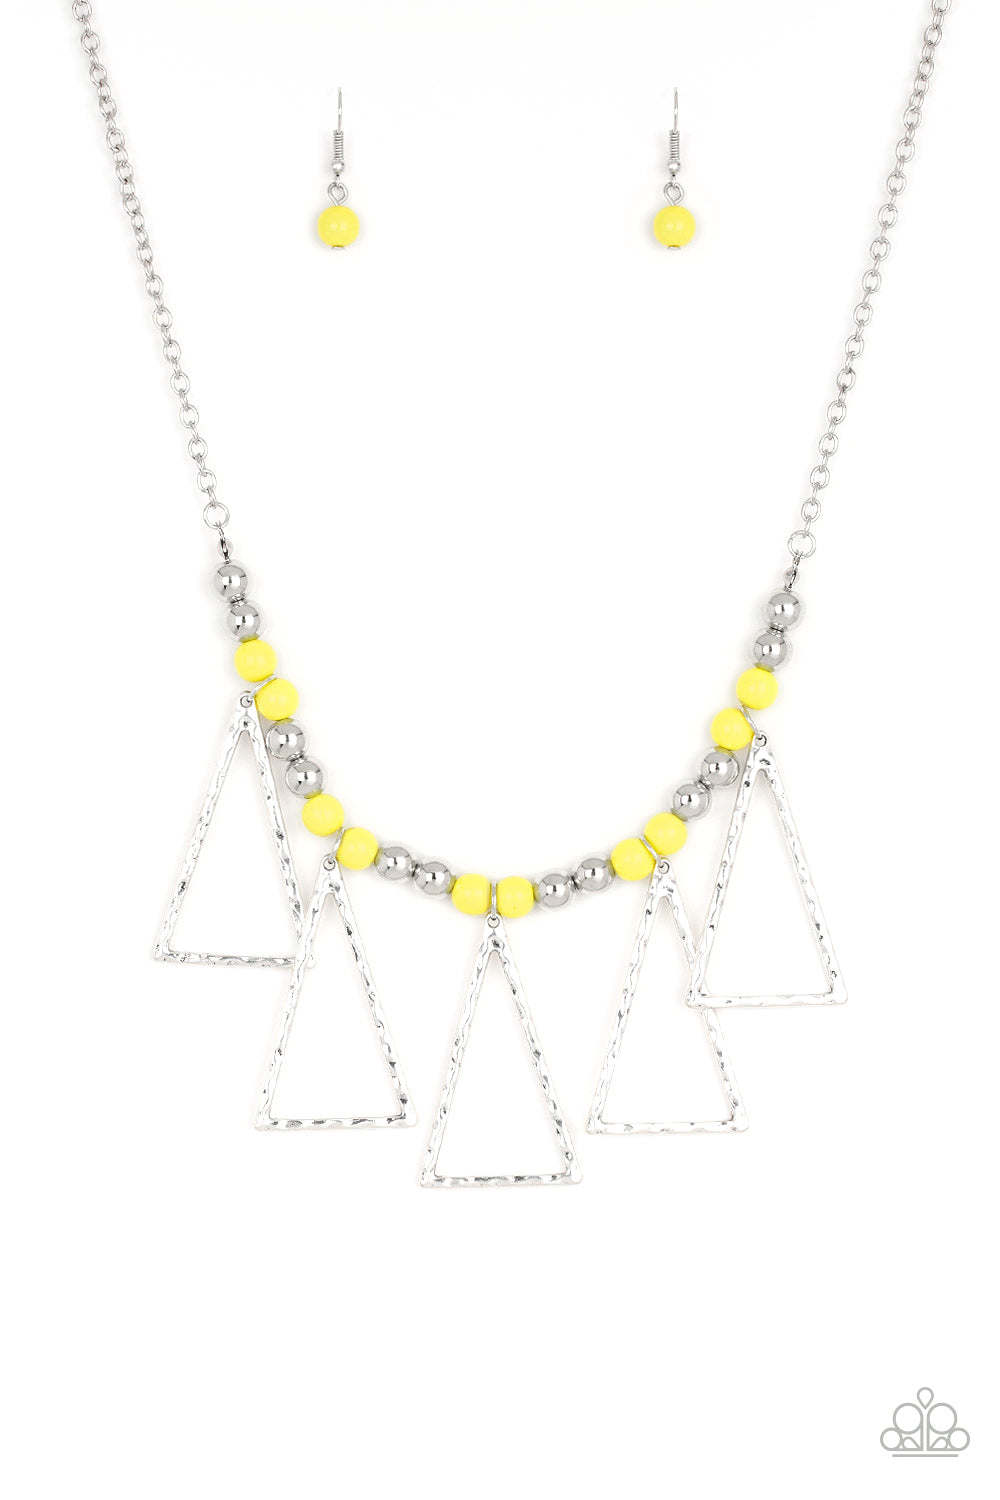 A collection of shiny silver and vibrant yellow beads are threaded along an invisible wire below the collar. Hammered triangular frames swing from the bottom of the colorful compilation, creating an artistic fringe. Features an adjustable clasp closure.